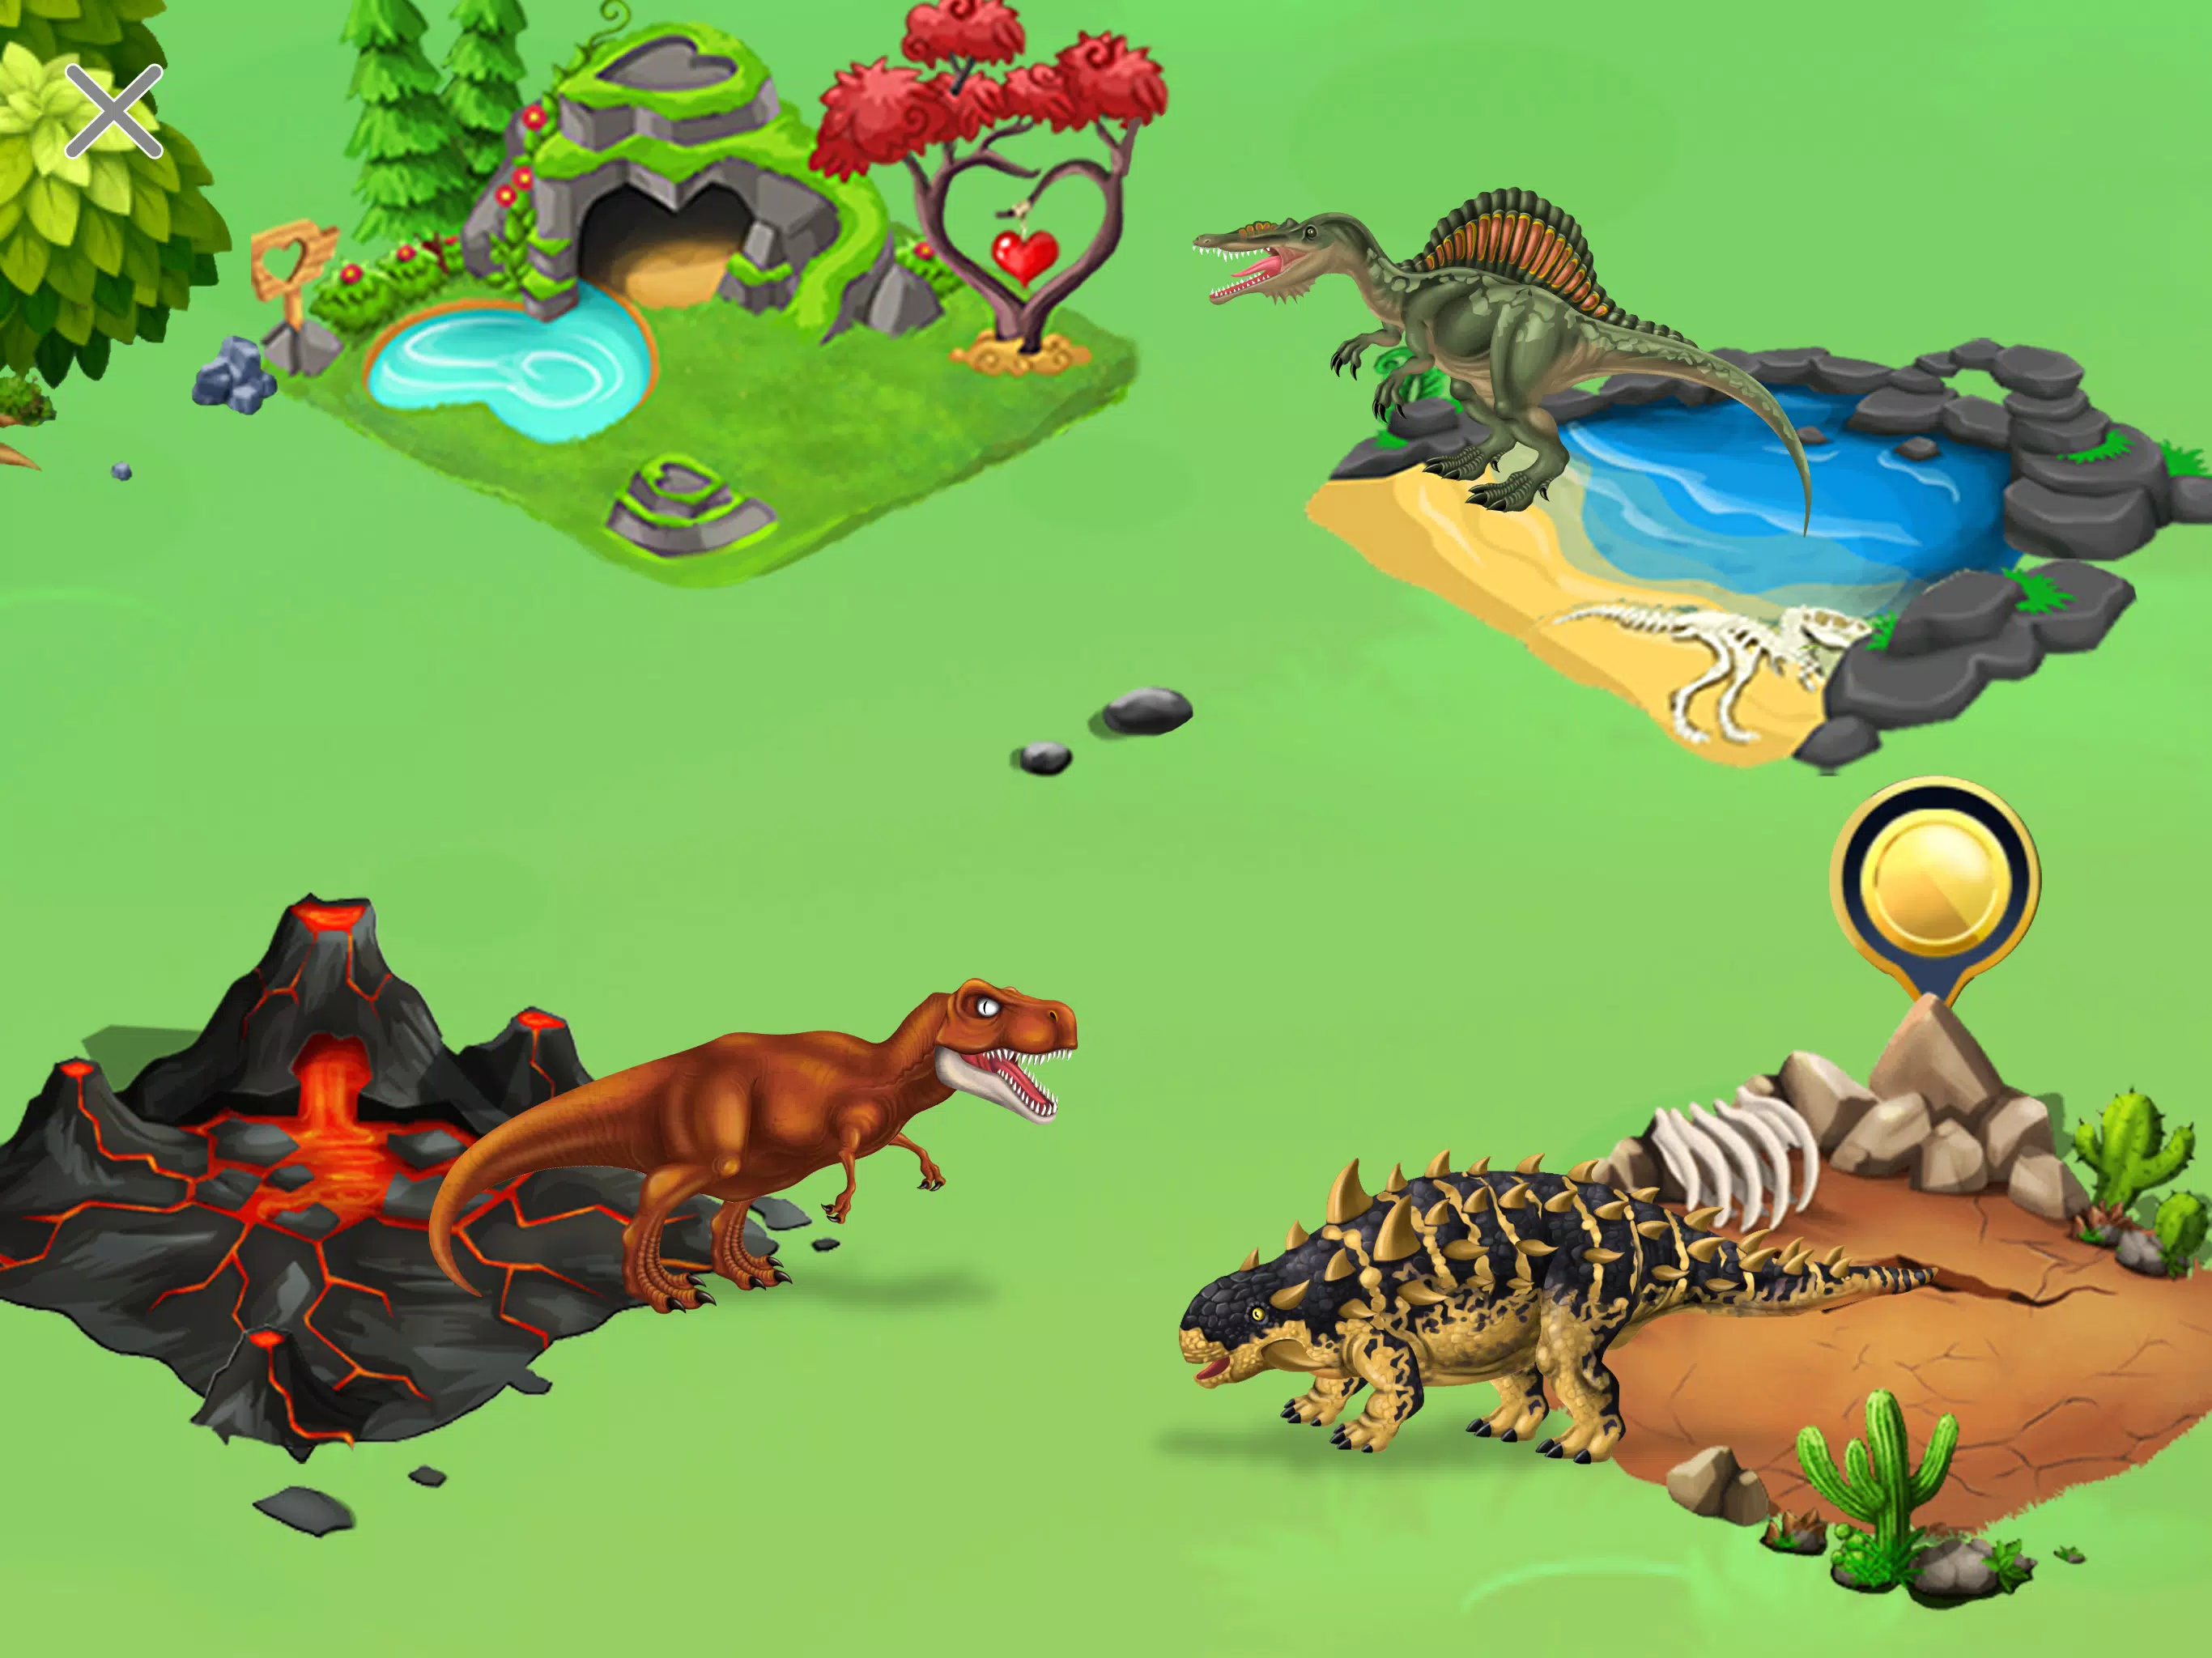 Jurassic Dinosaur: Dino Game for Android - Download the APK from Uptodown